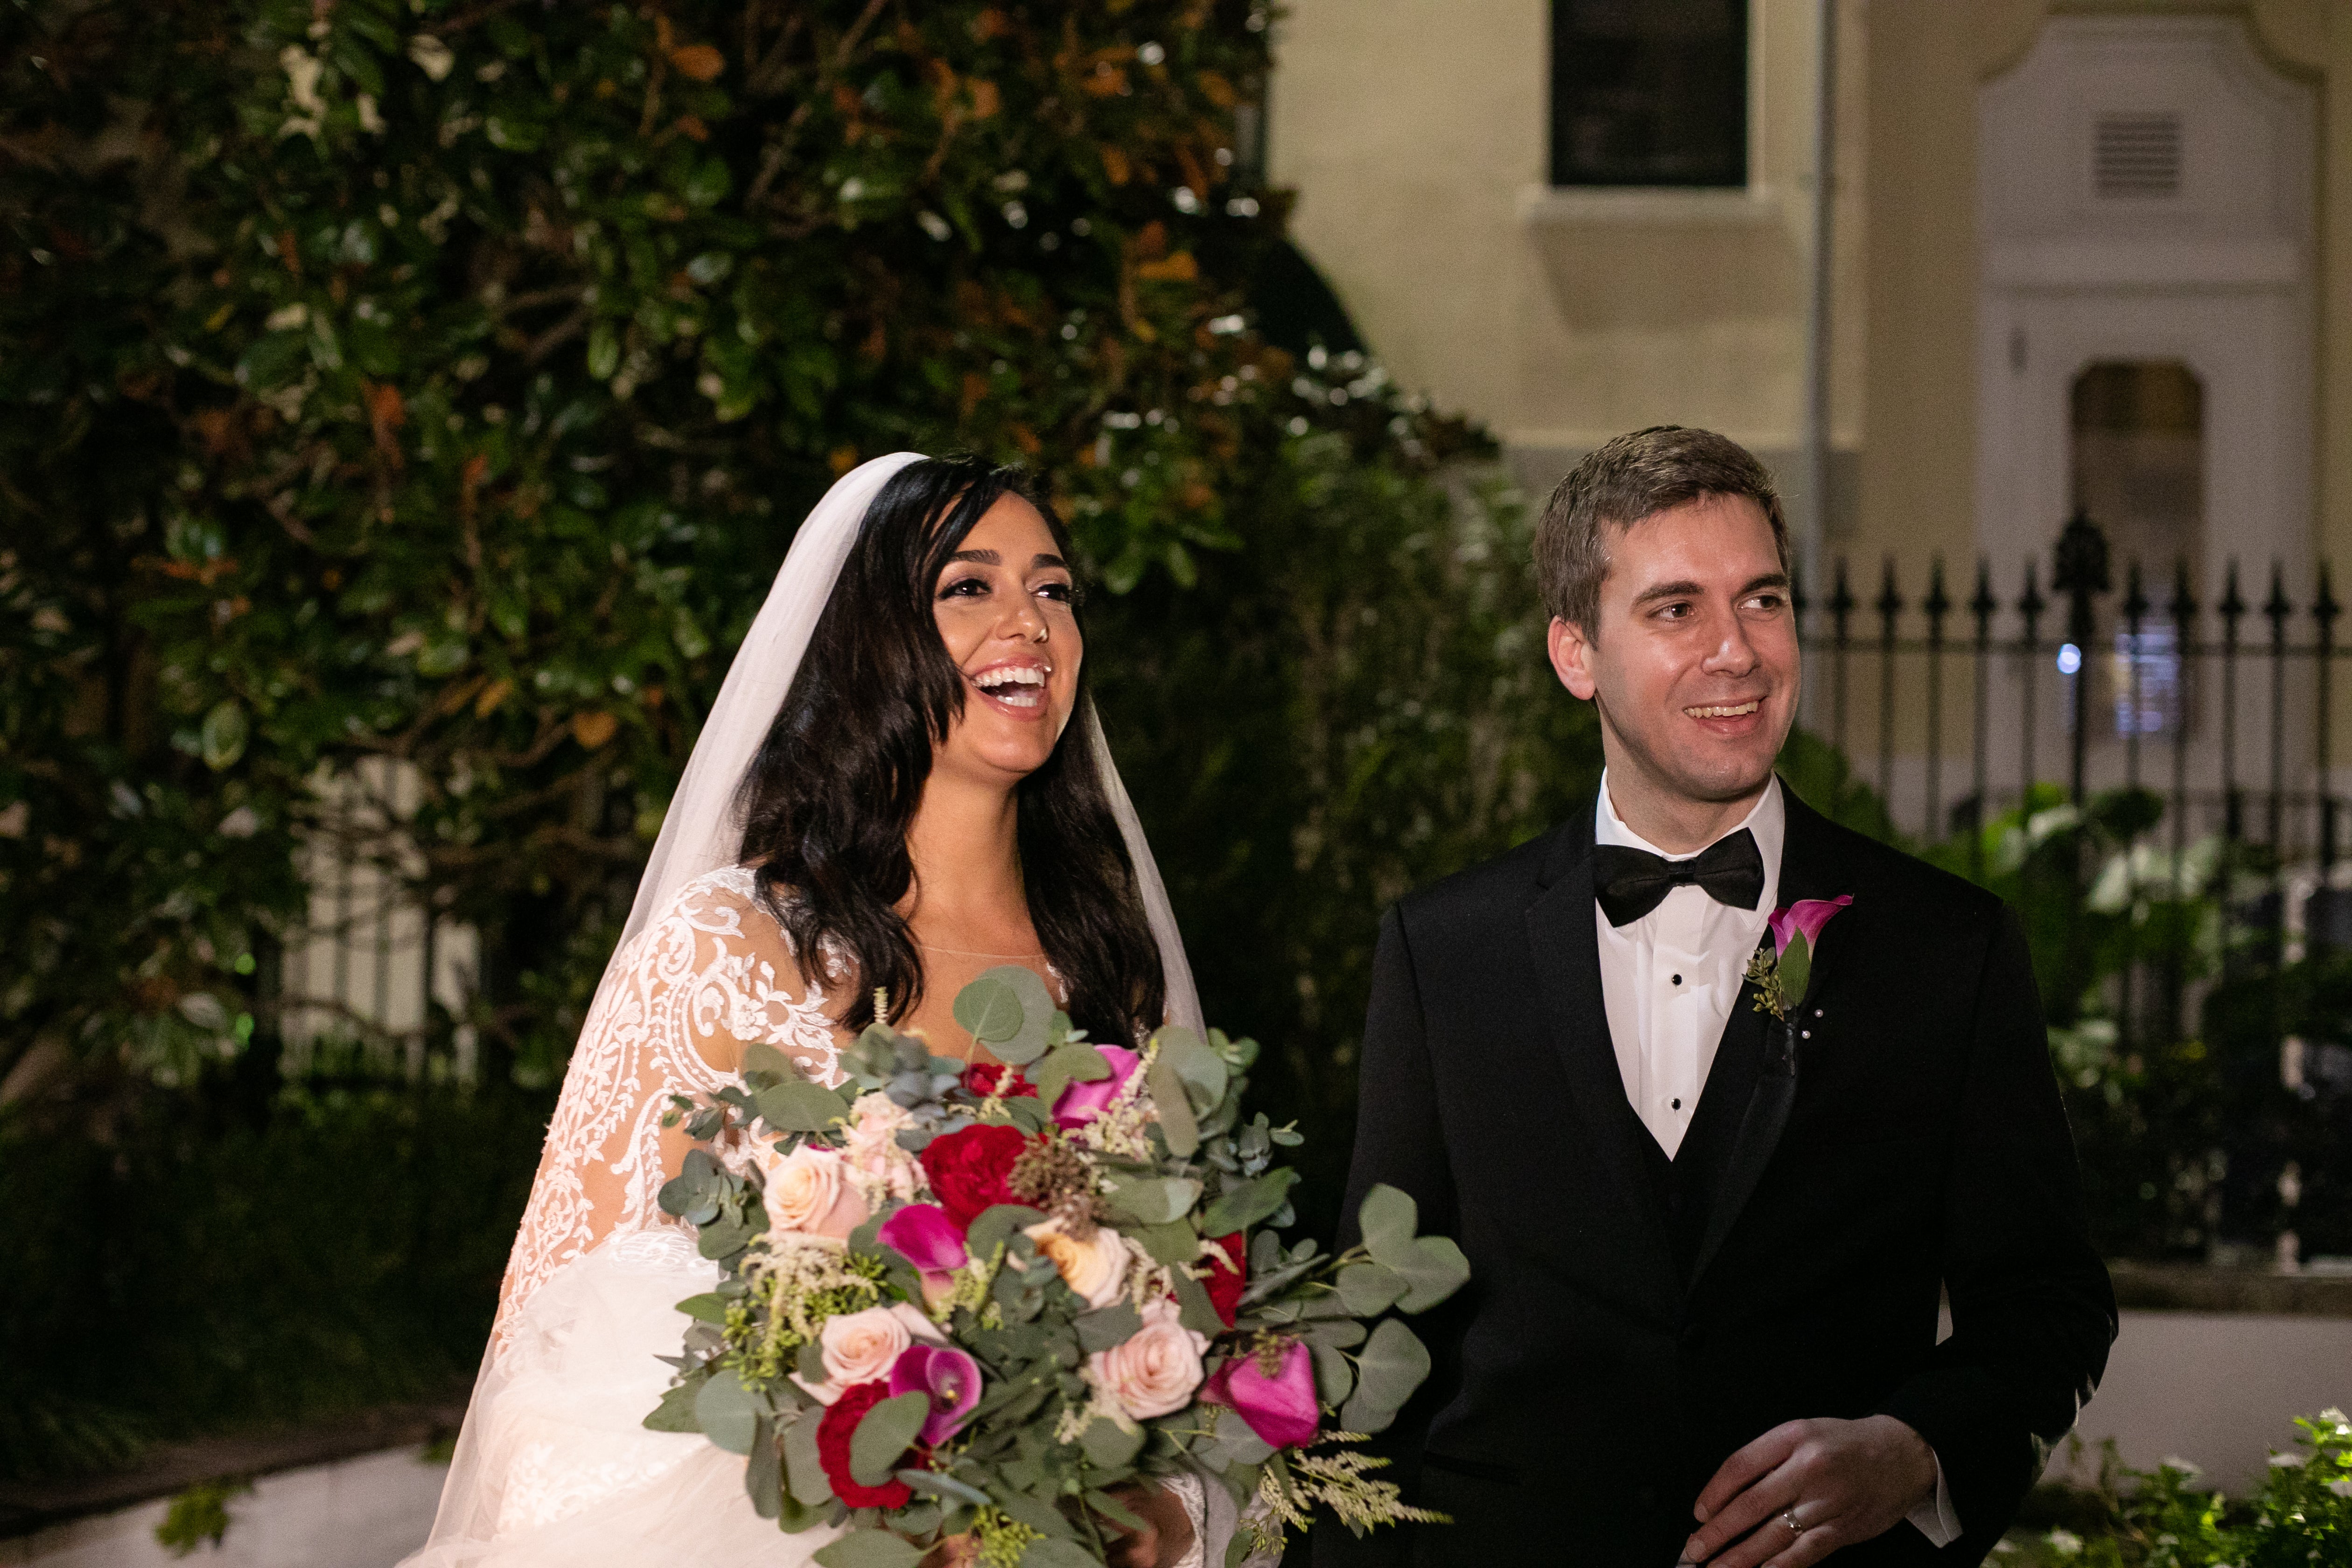 Christina and Henry on their wedding day on 'Married at First Sight' Season 11